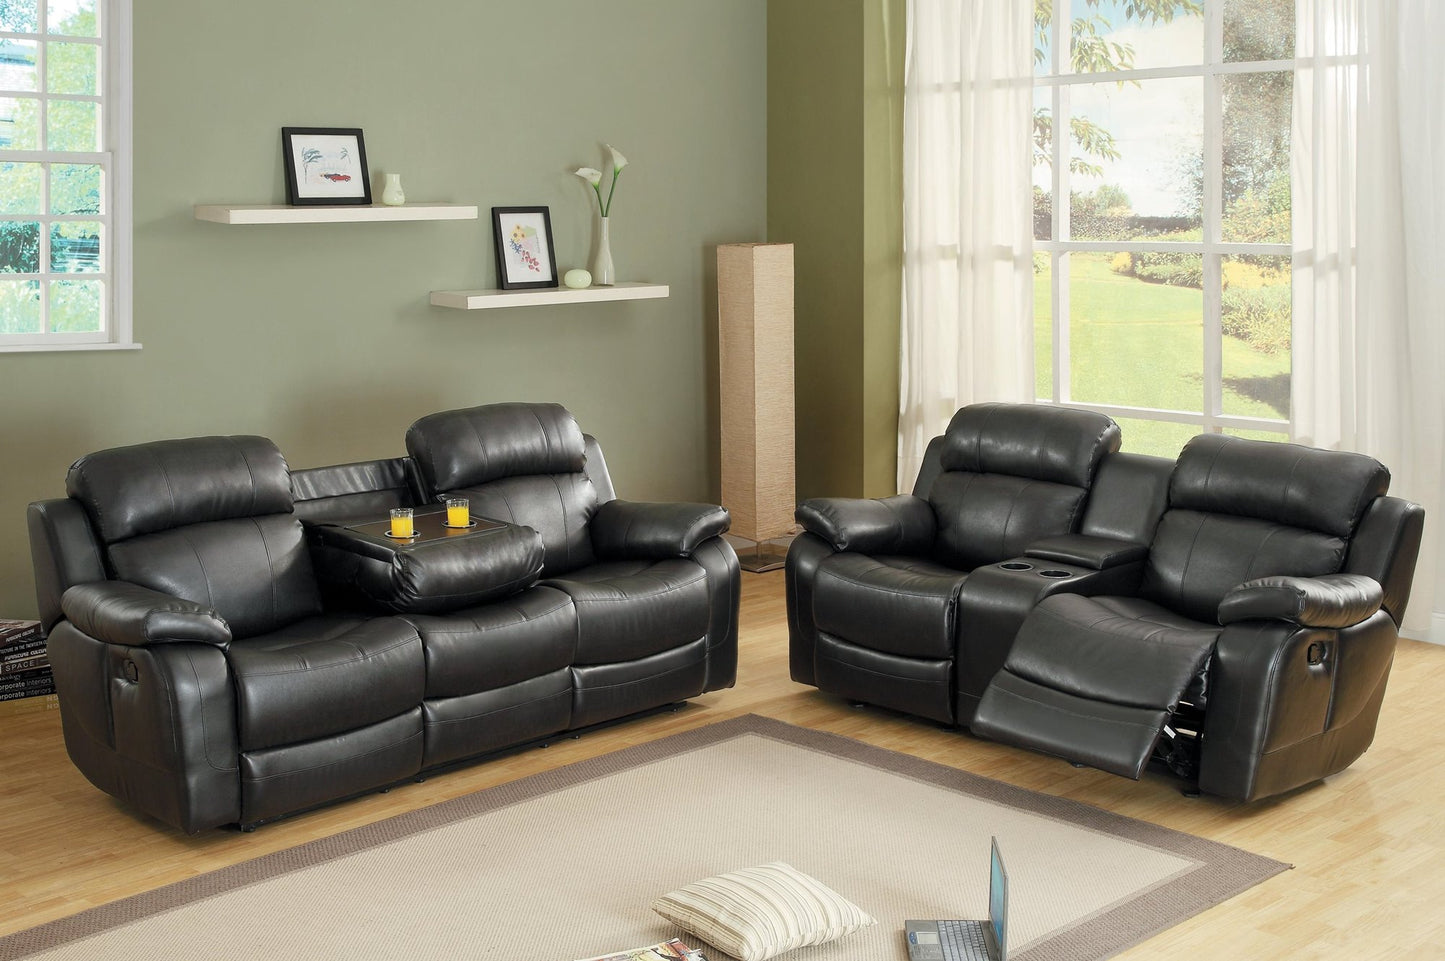 Homelegance Marille2PC Set Double Glider Reclining Love Seat with Console & Glider Recliner Chair in Leather - Black